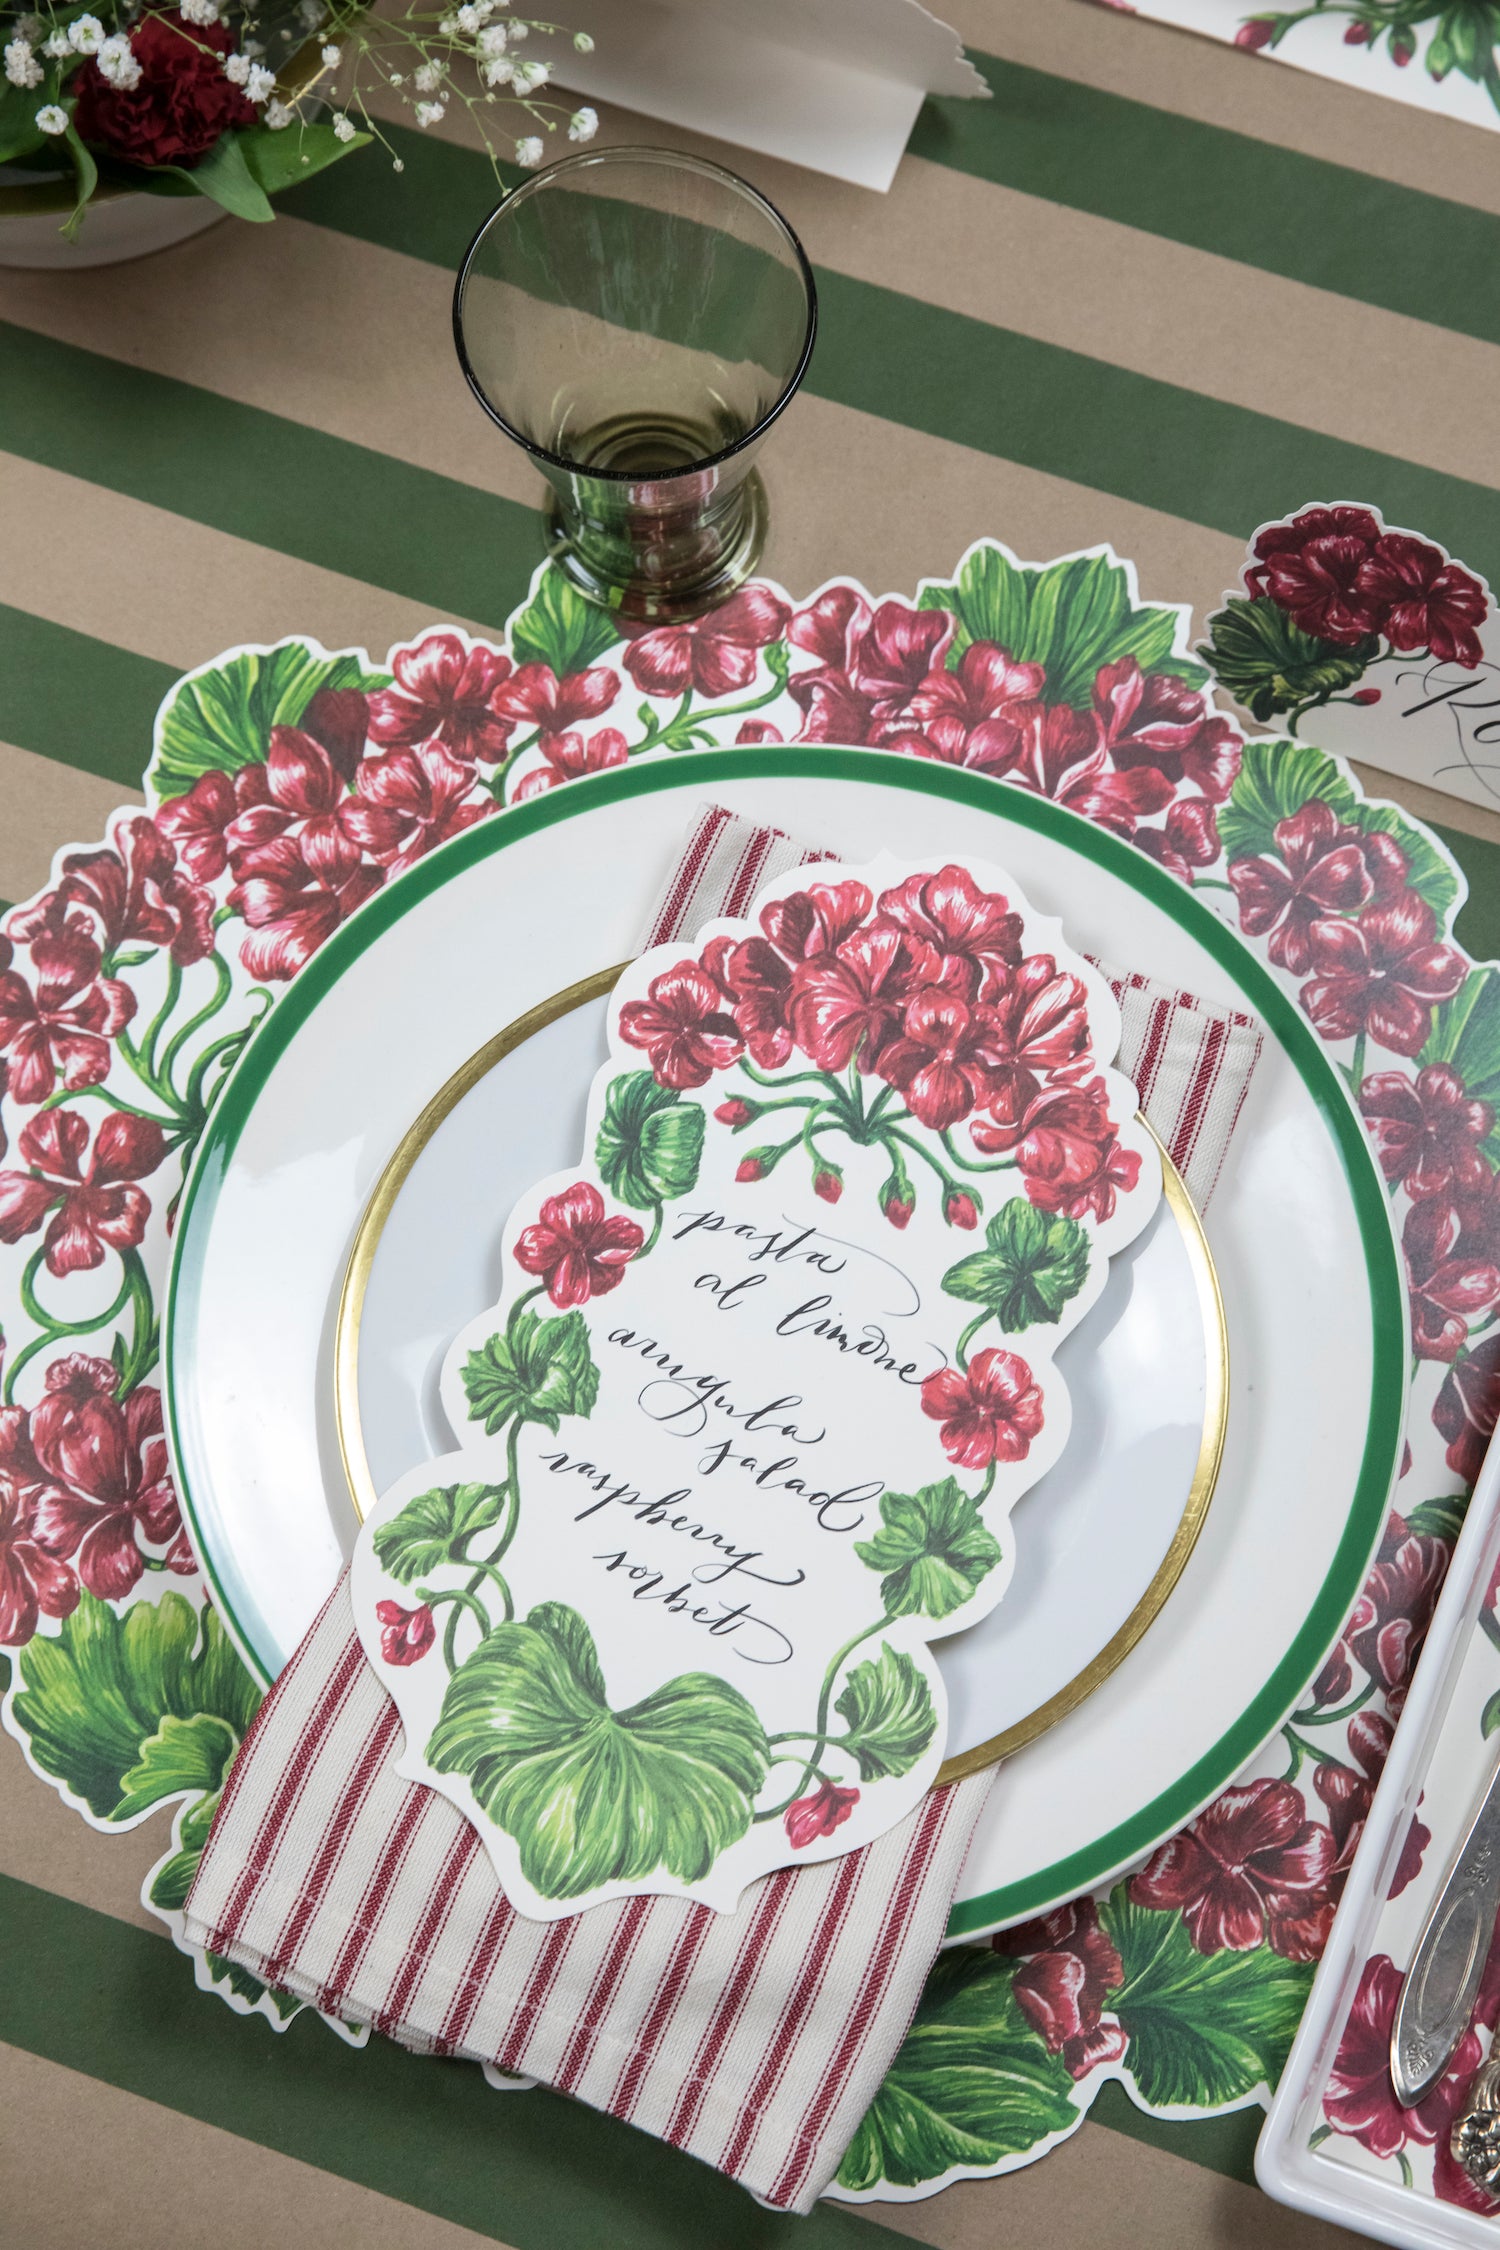 A Geranium Table Accent with a menu written on it in beautiful cursive resting on the plate of an elegant place setting.